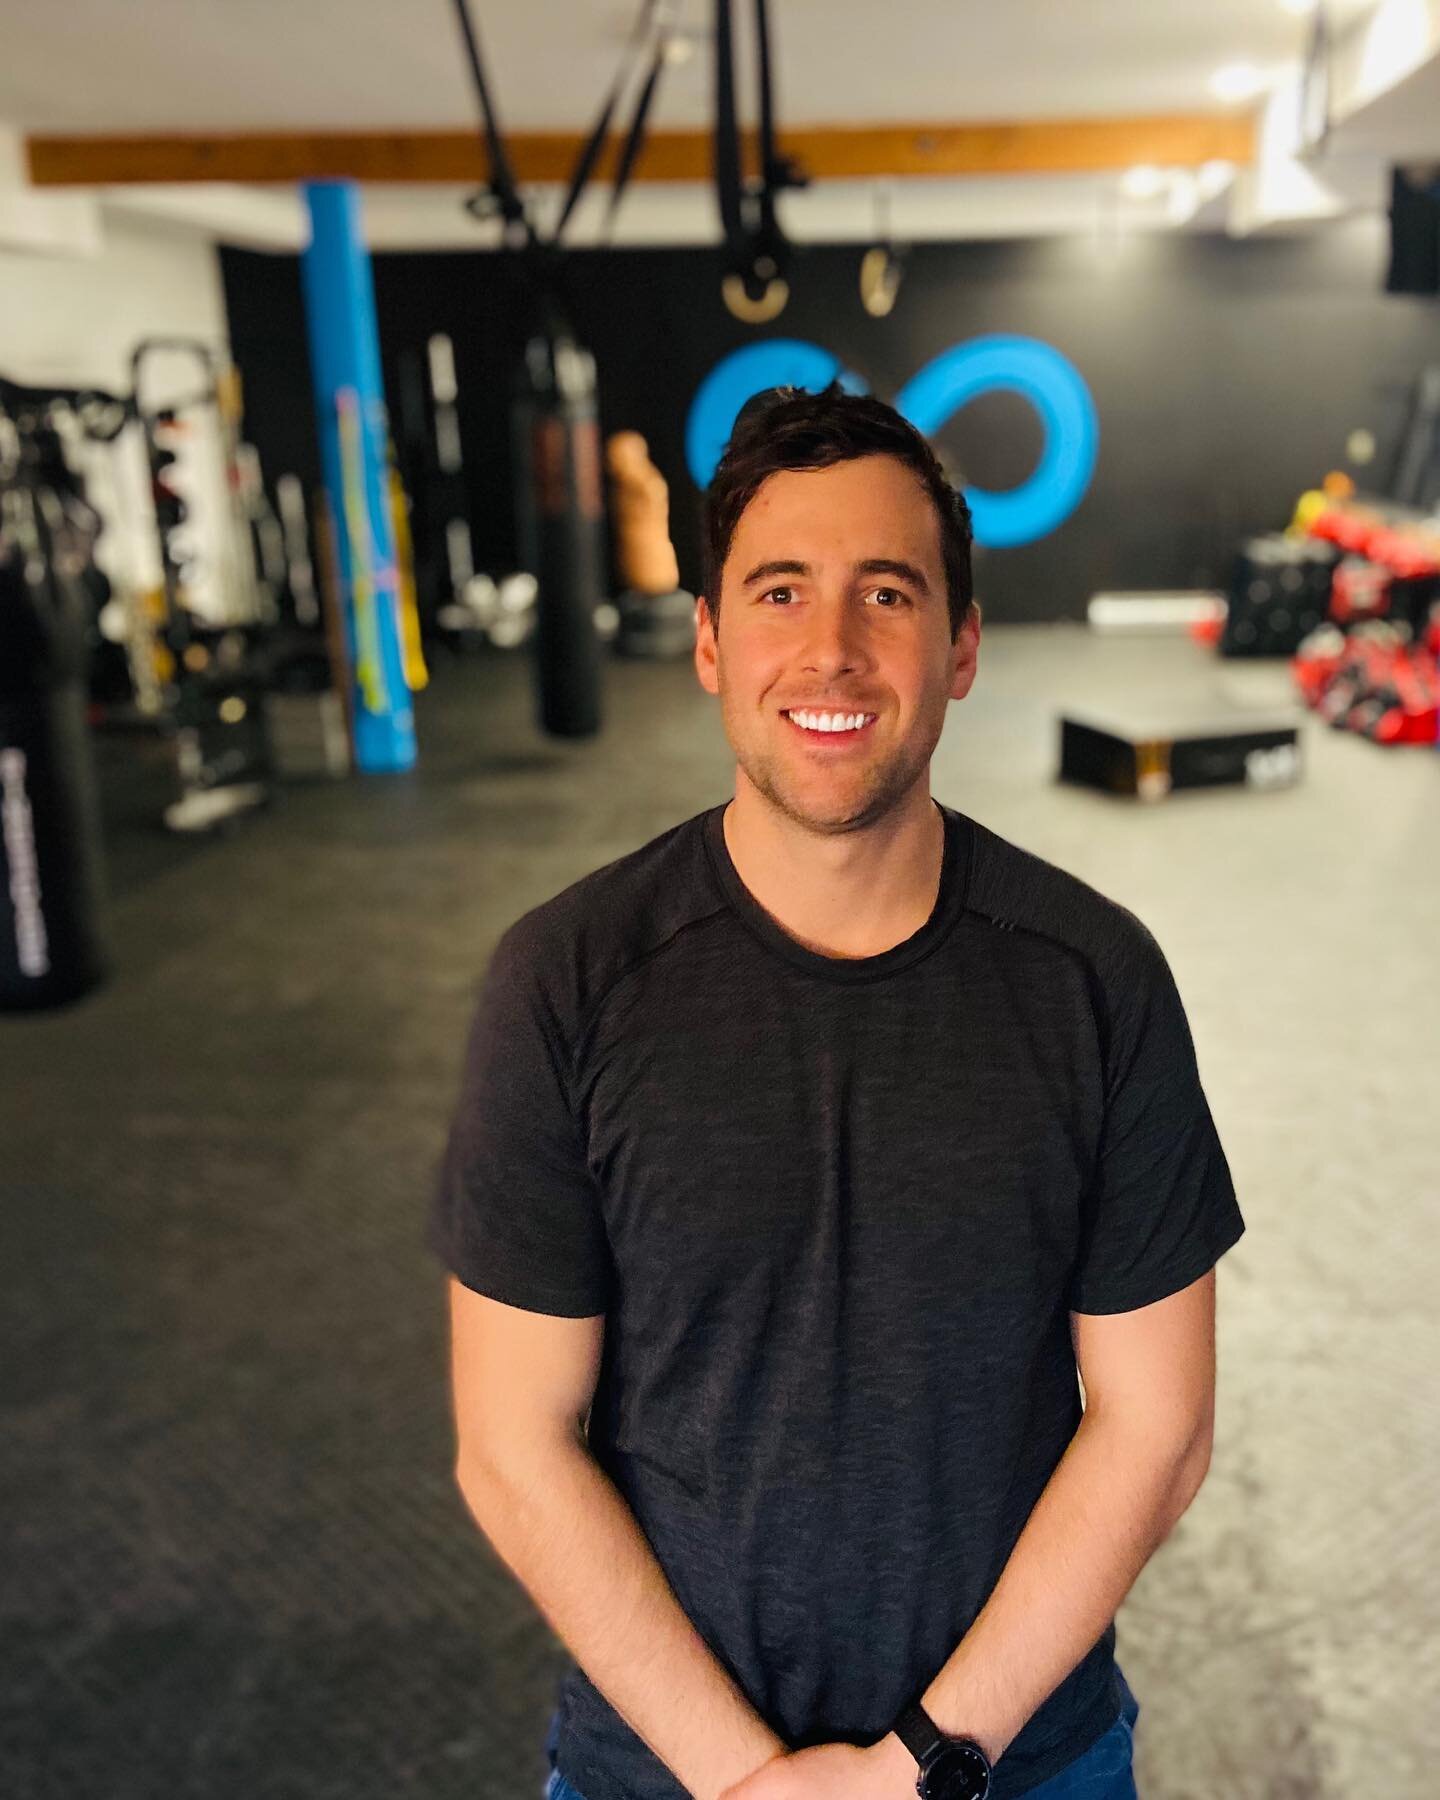 Better late than never with the introductions&hellip; 🤝

Arthur Andrews, B.AET, CAT(C), NSCA-CSCS
* Head coach 
* Athletic Therapist 
Arthur has been coaching in high performance sport for 10 years. Arthur started training as an athlete in 2010 with